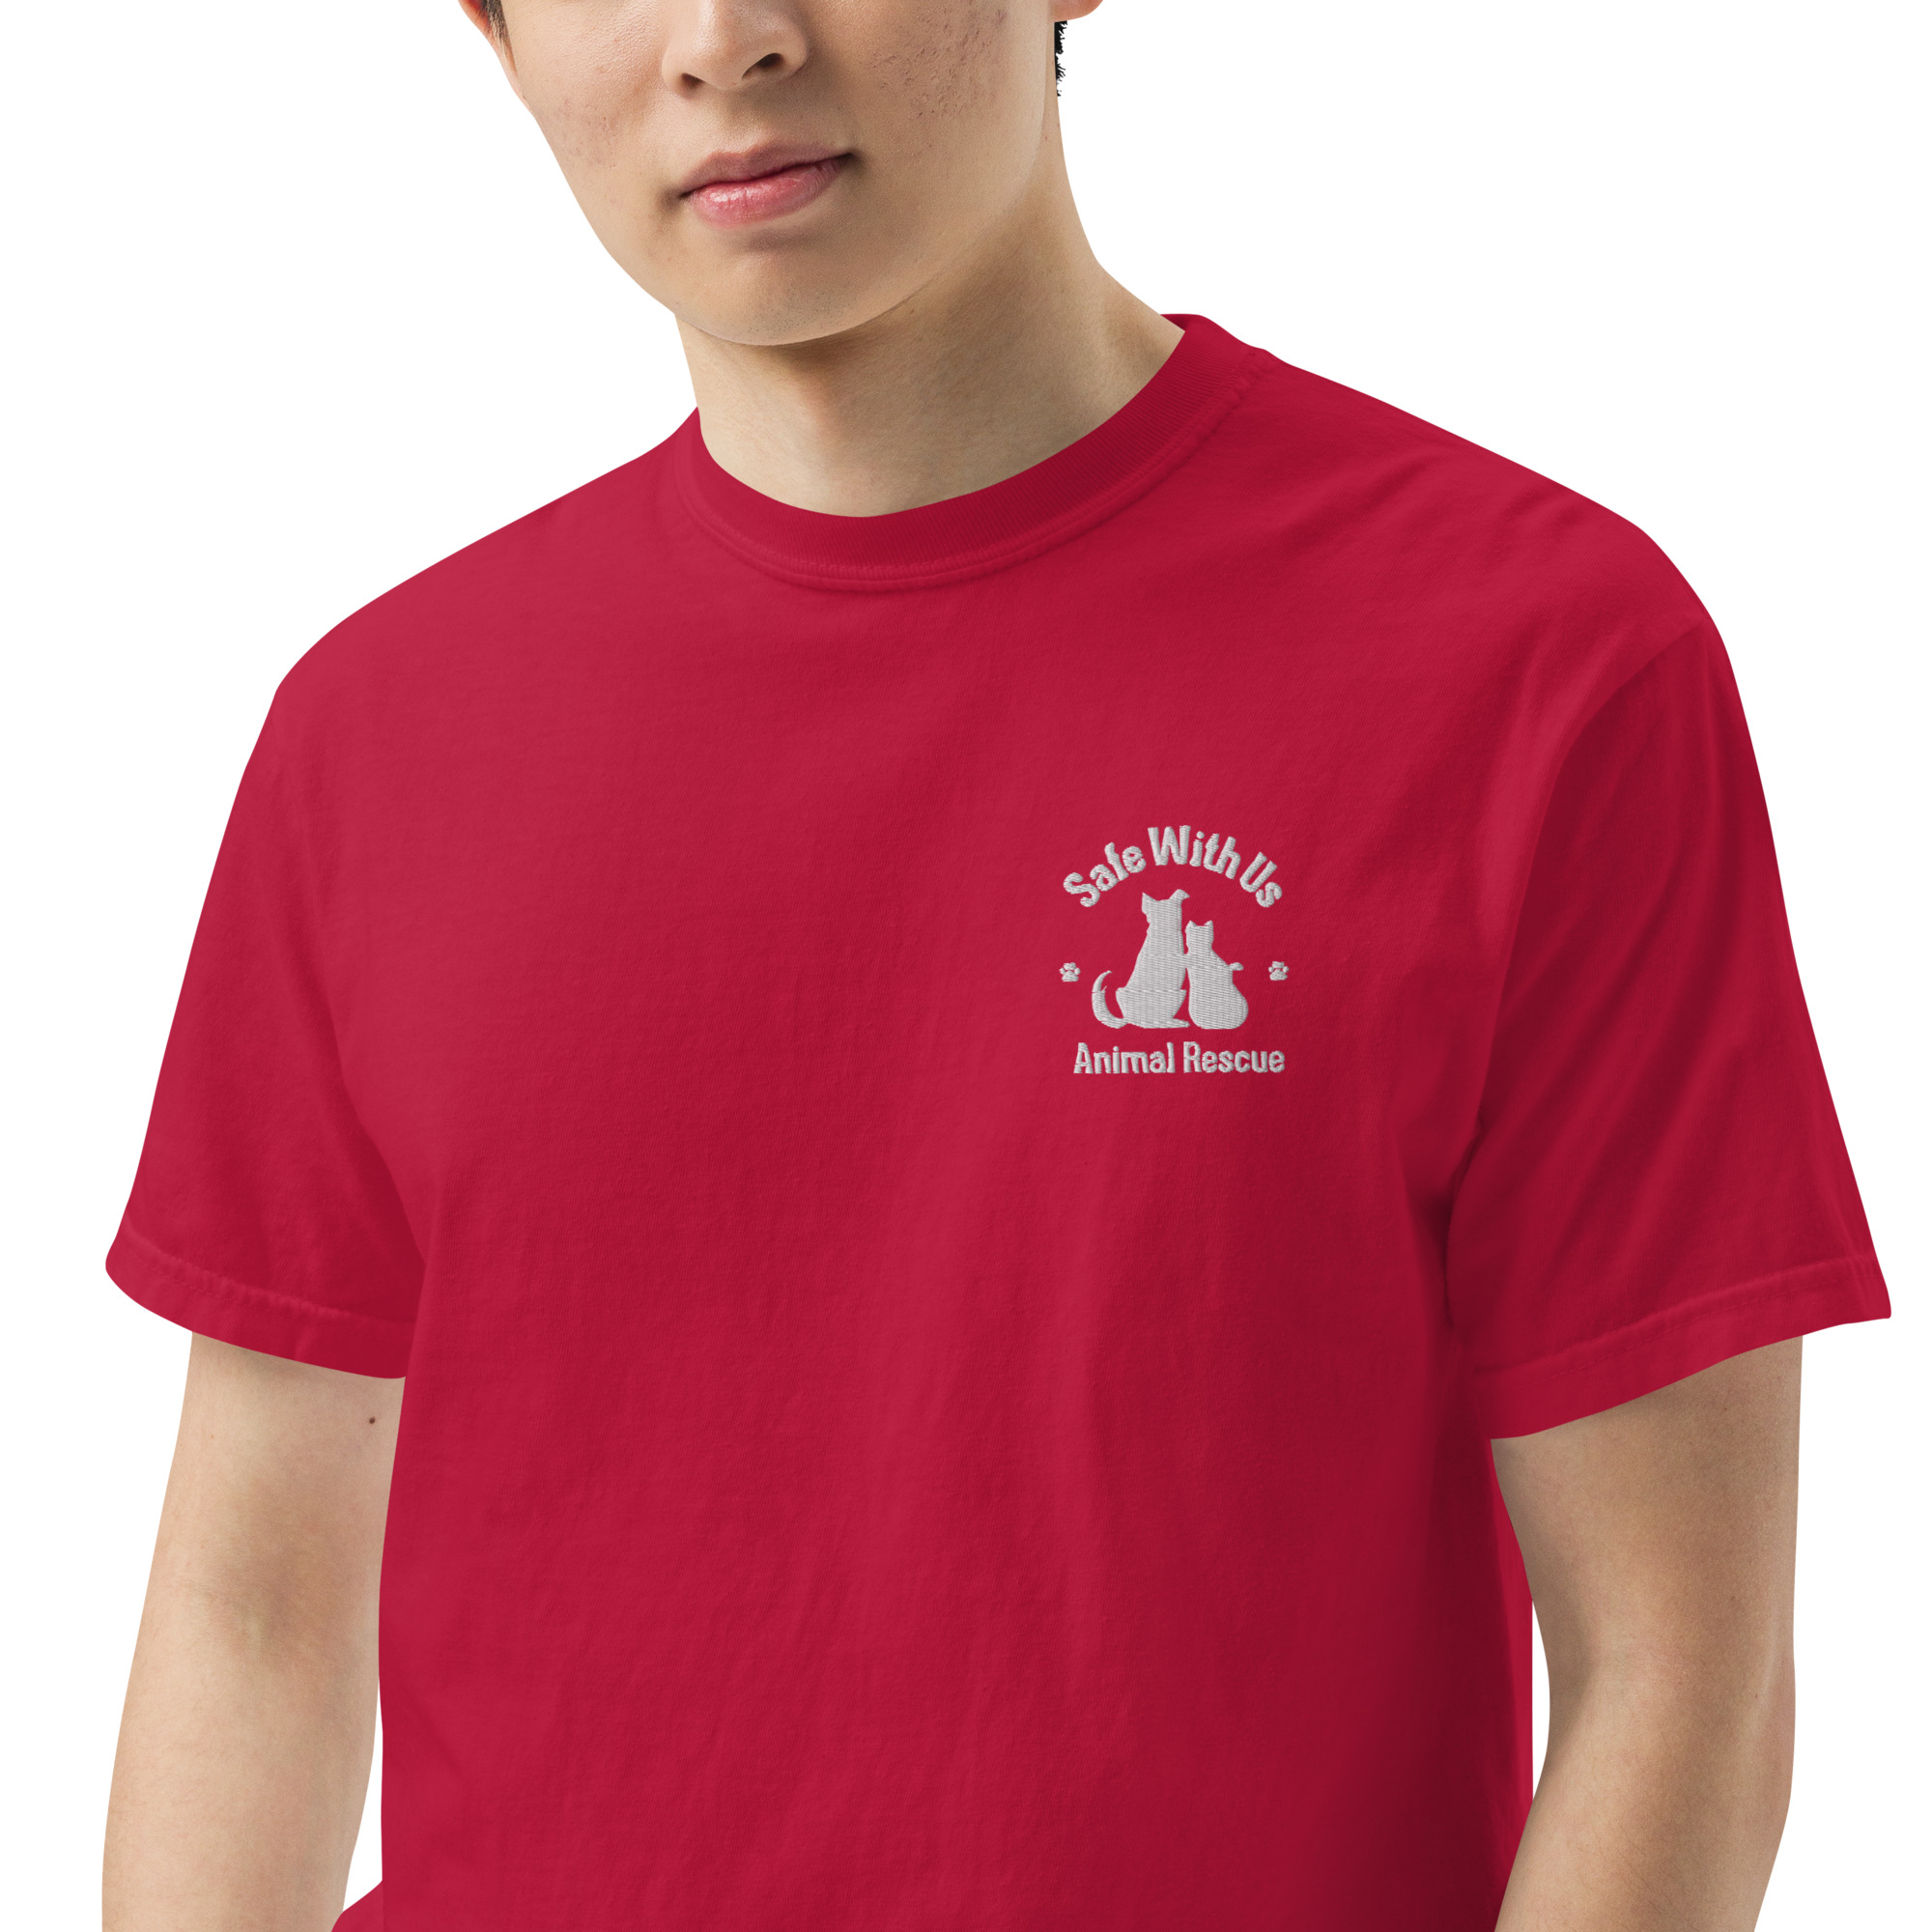 mens-garment-dyed-heavyweight-t-shirt-red-zoomed-in-3-6415fedc250a0.jpg